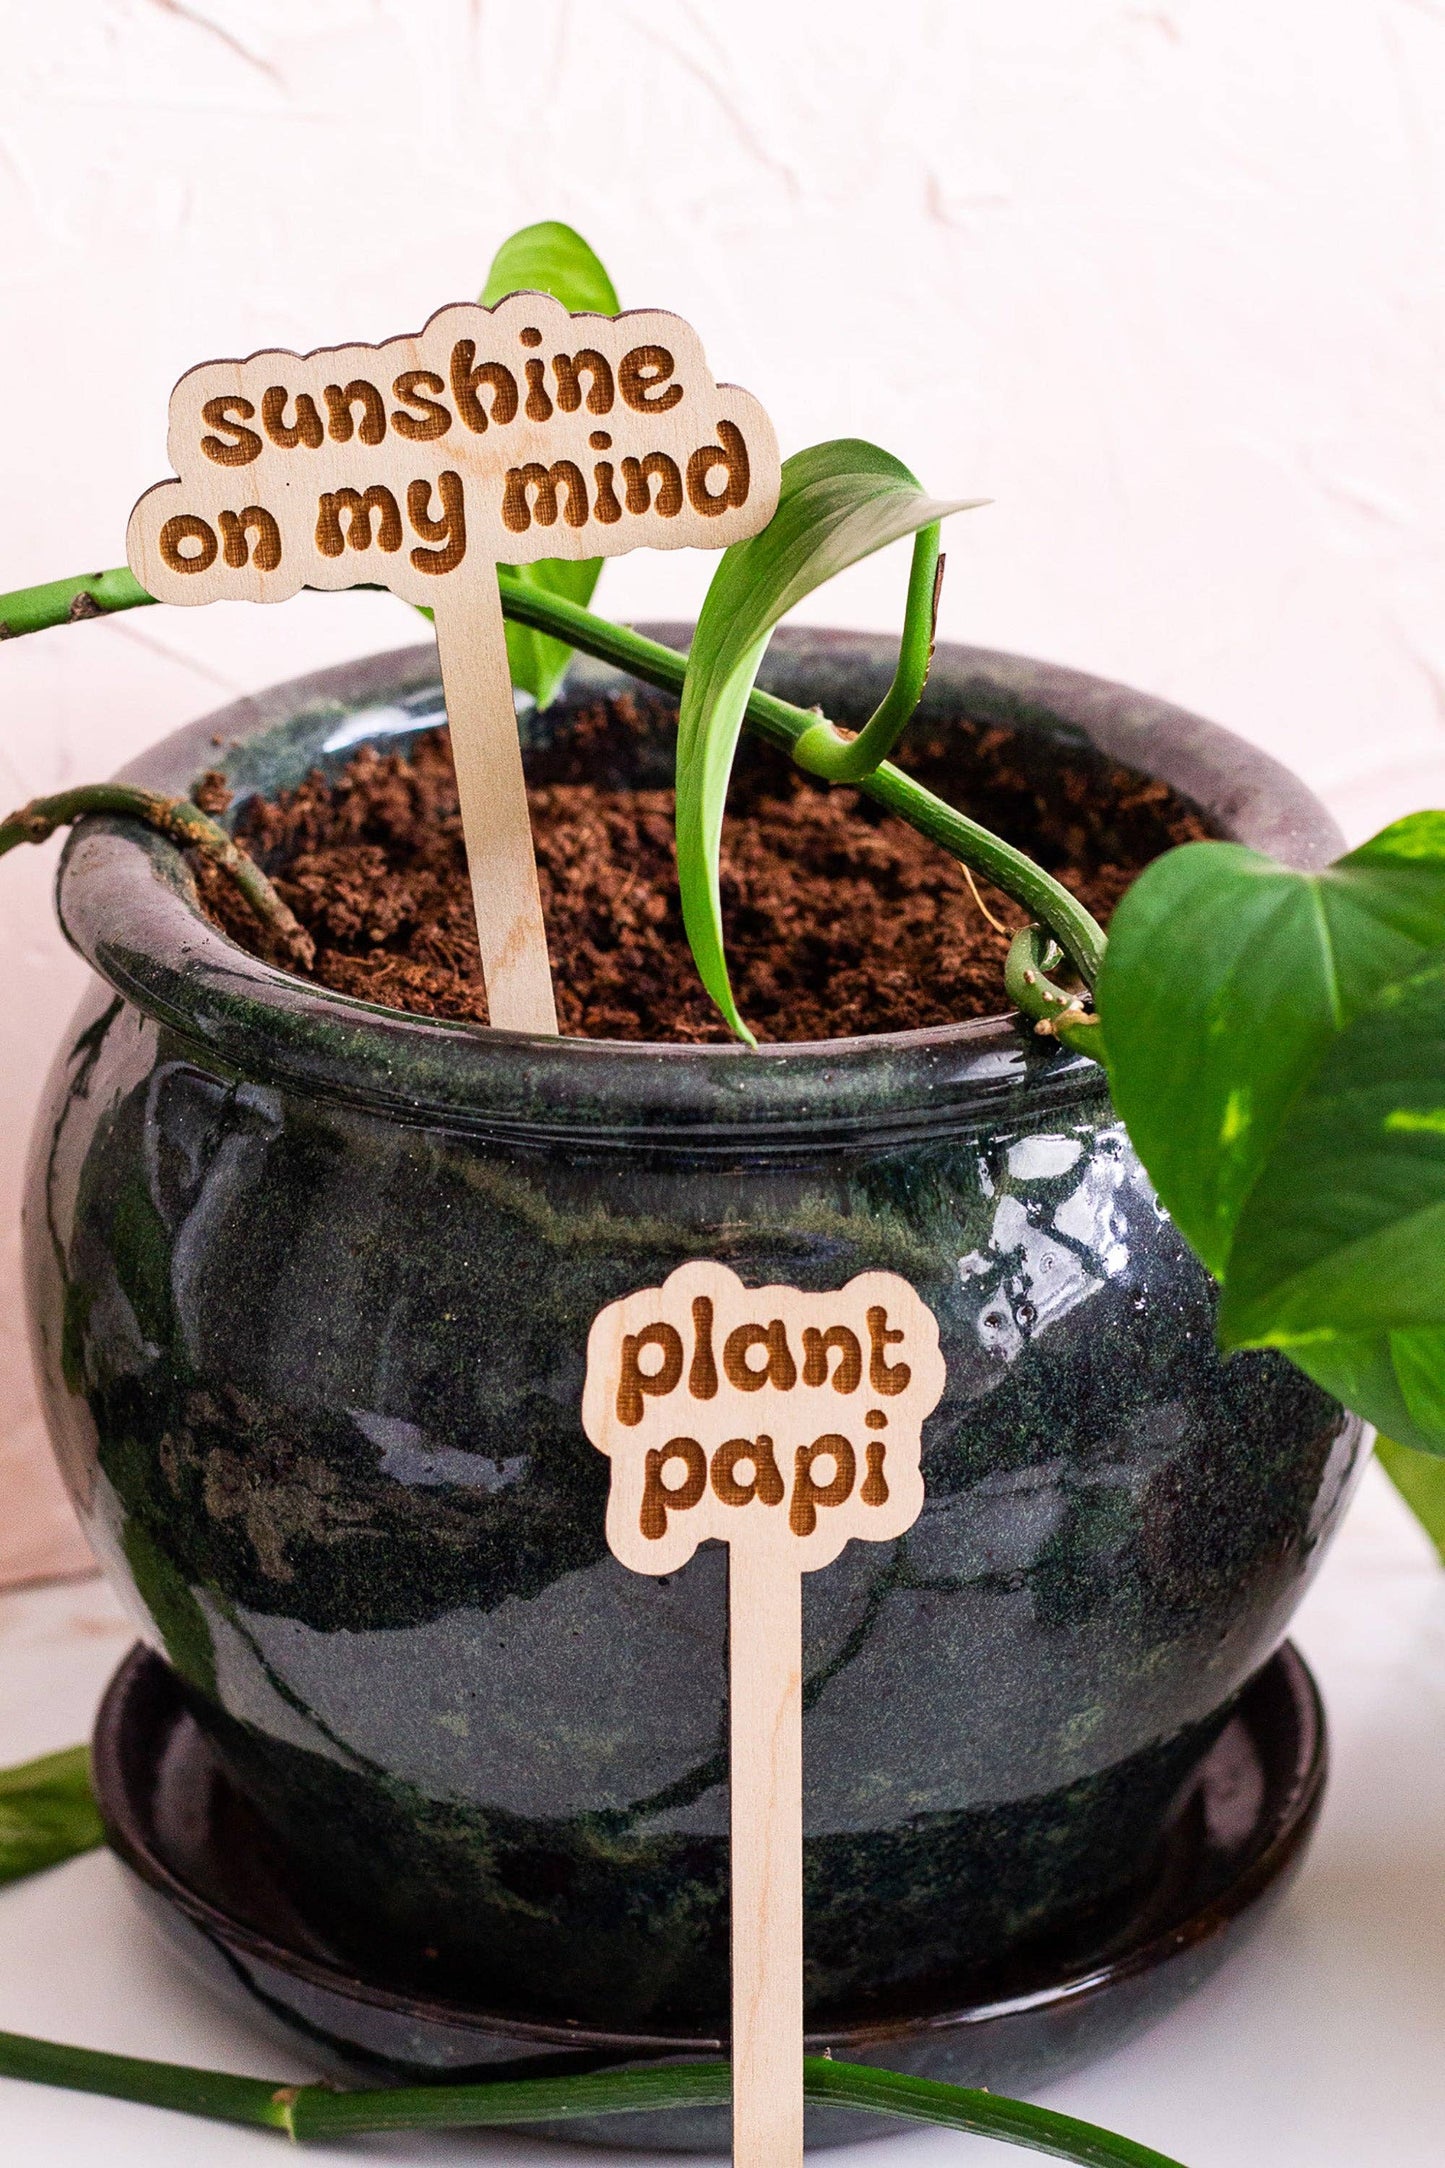 Retro Funny Wooden Plant Markers - Little sprout